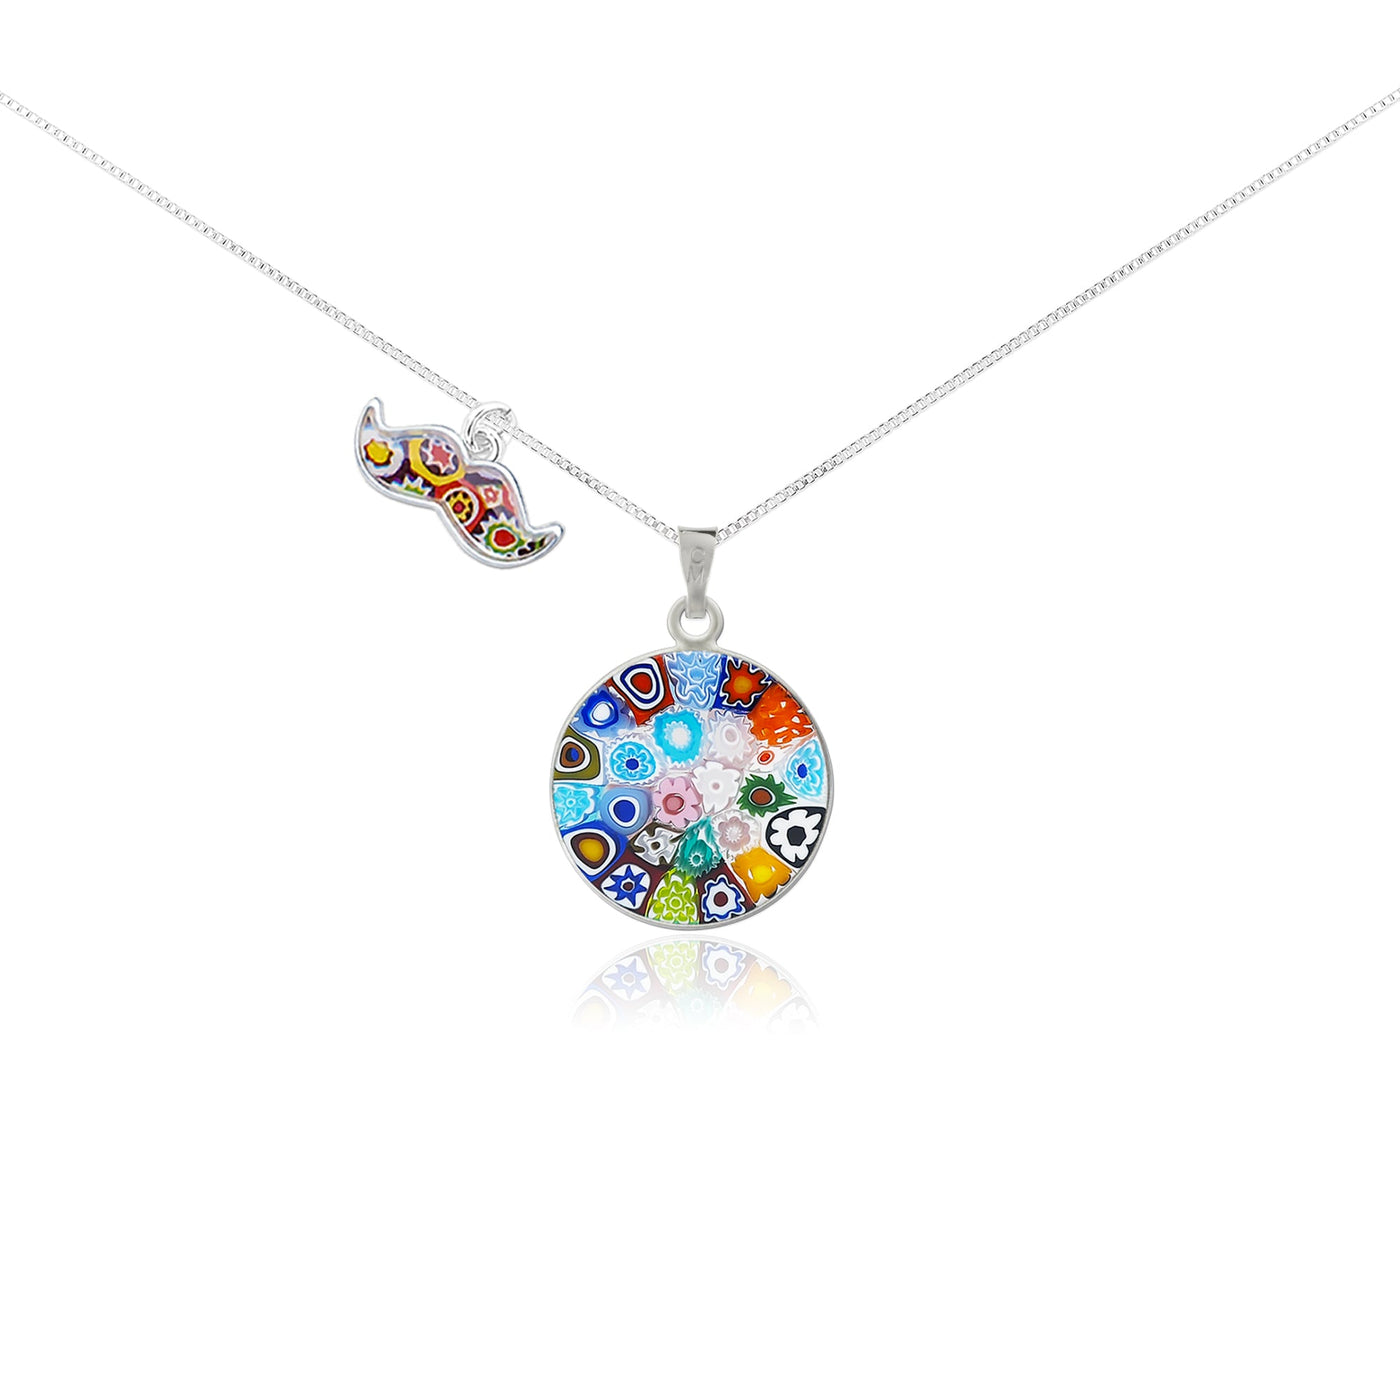 Bouquet in Bloom Necklace - 15mm - Pendant Necklace